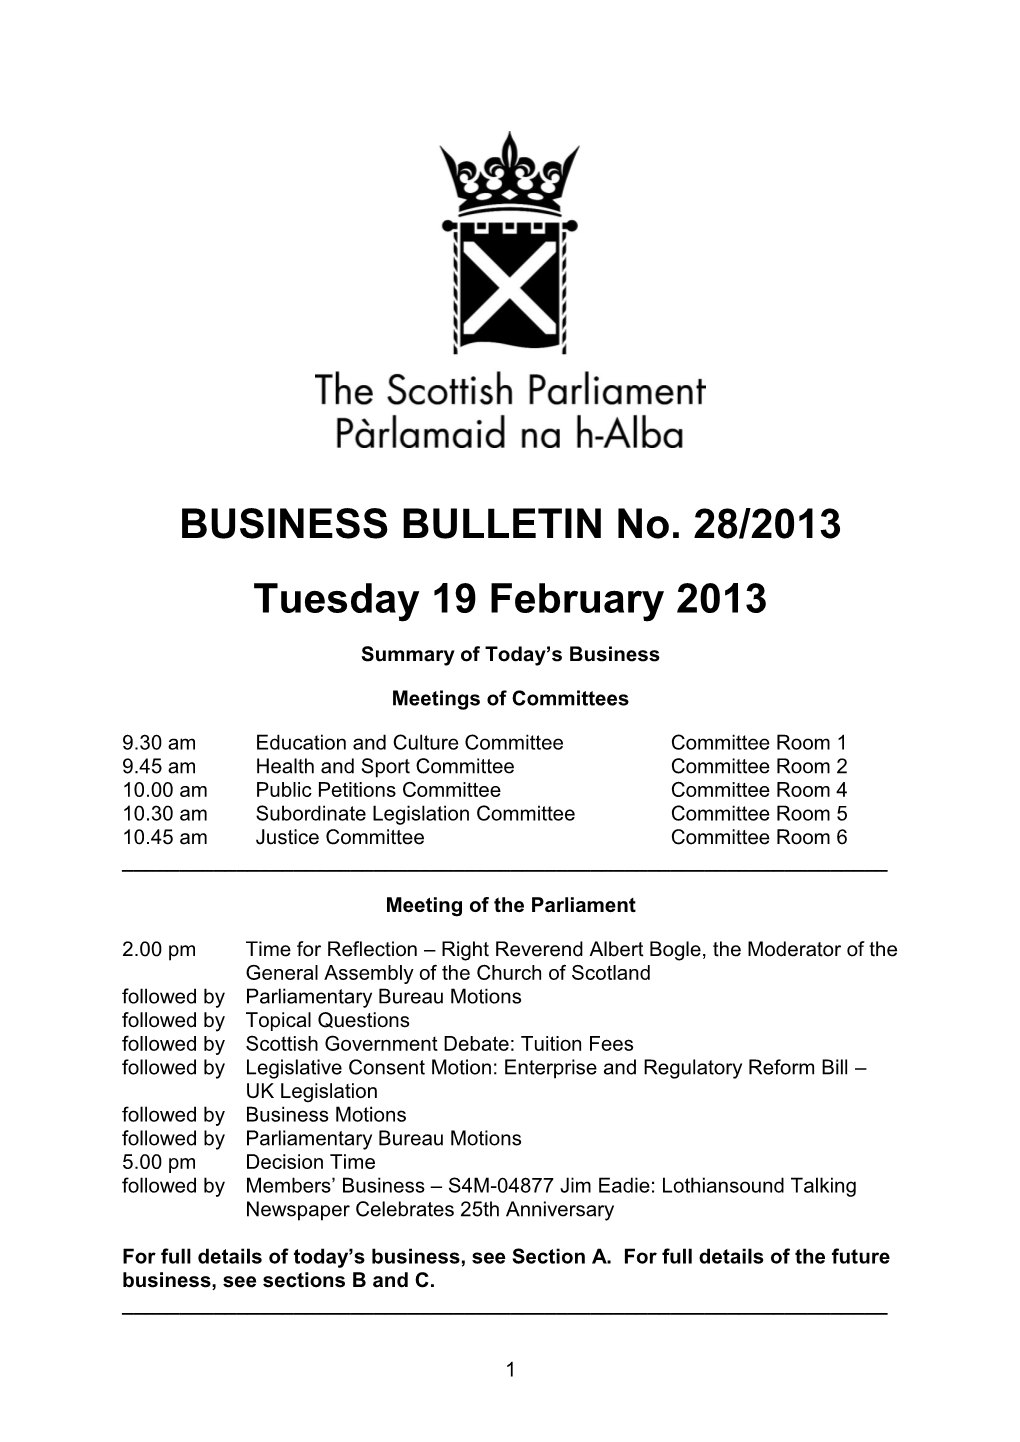 BUSINESS BULLETIN No. 28/2013 Tuesday 19 February 2013